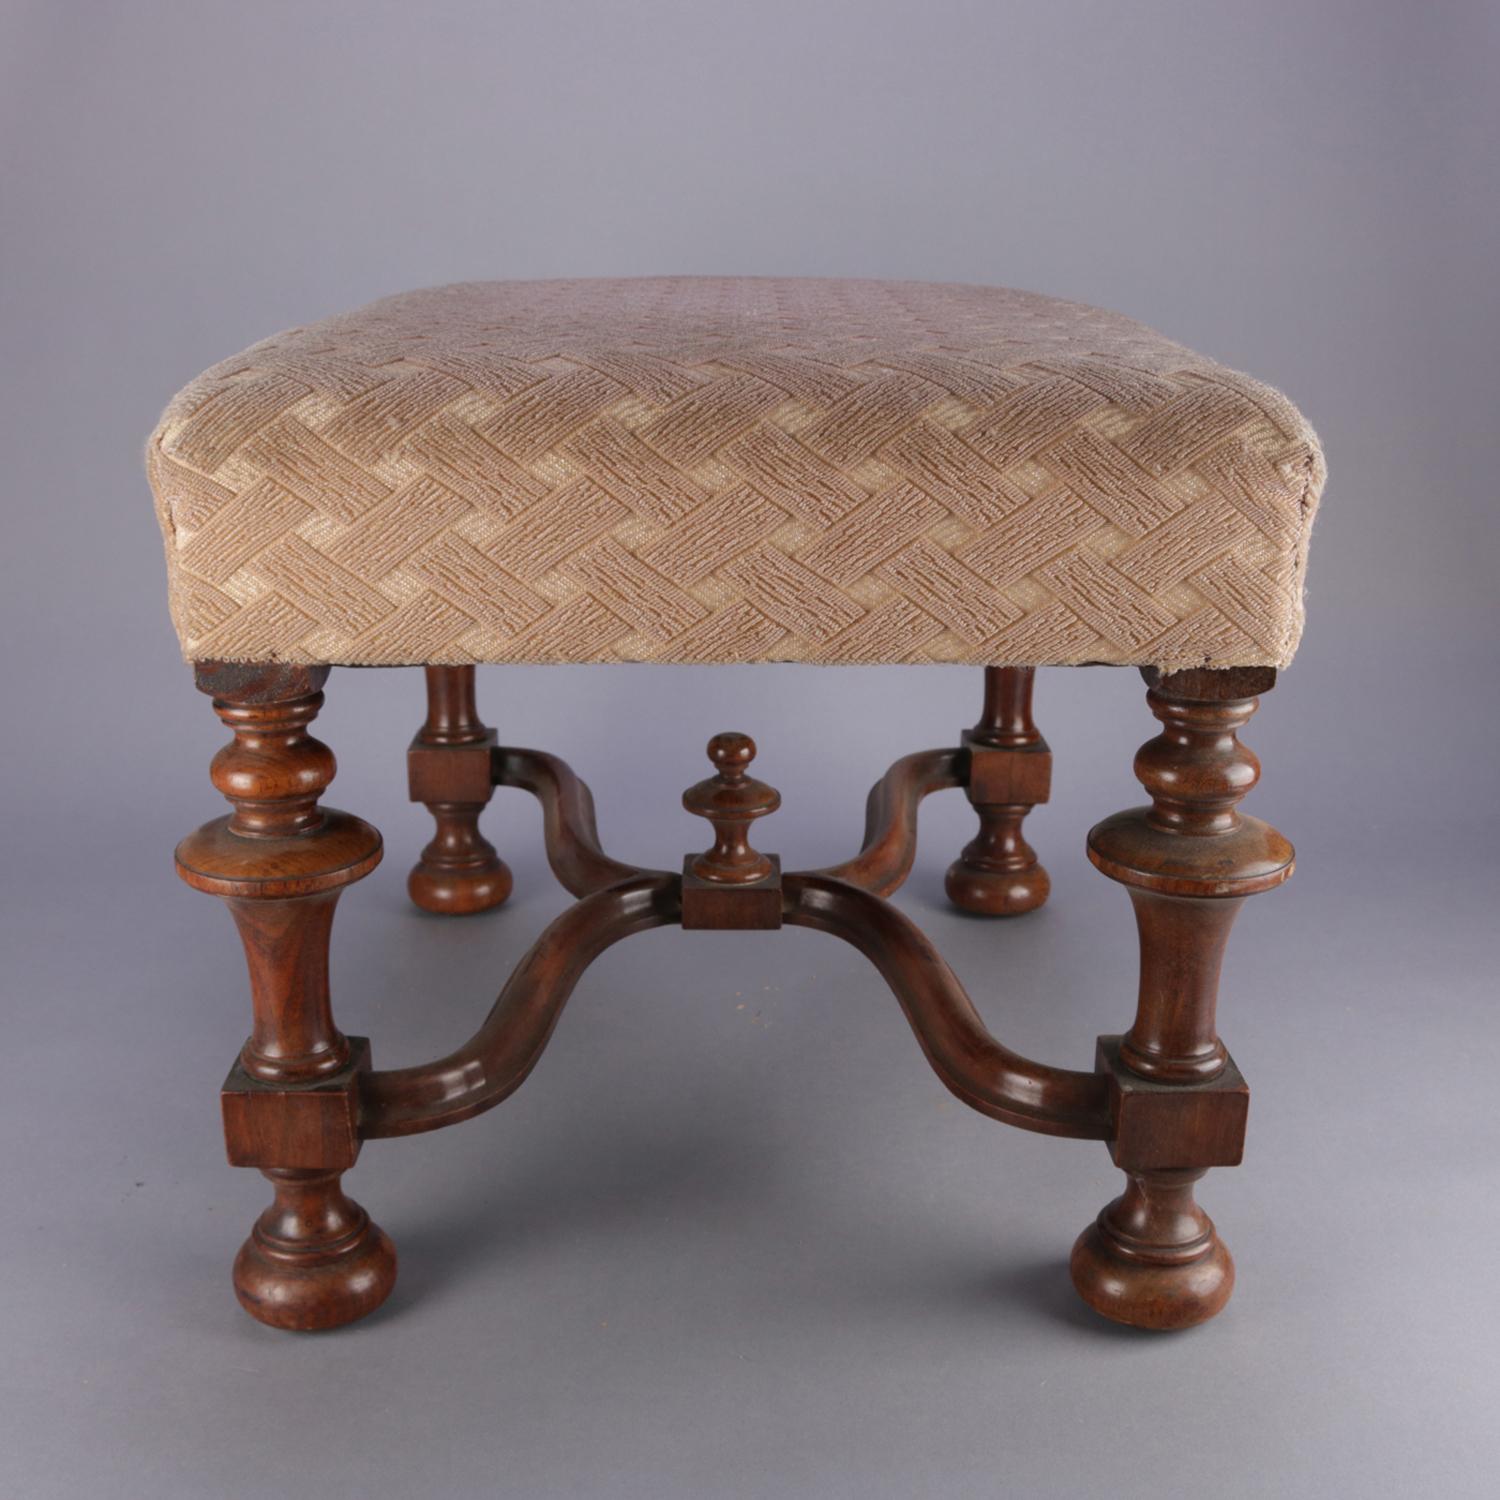 An antique William and Mary style footstool features carved walnut frame with turned legs and x-form stretcher having central final, upholstered seat, circa 1930.

Measures: 16